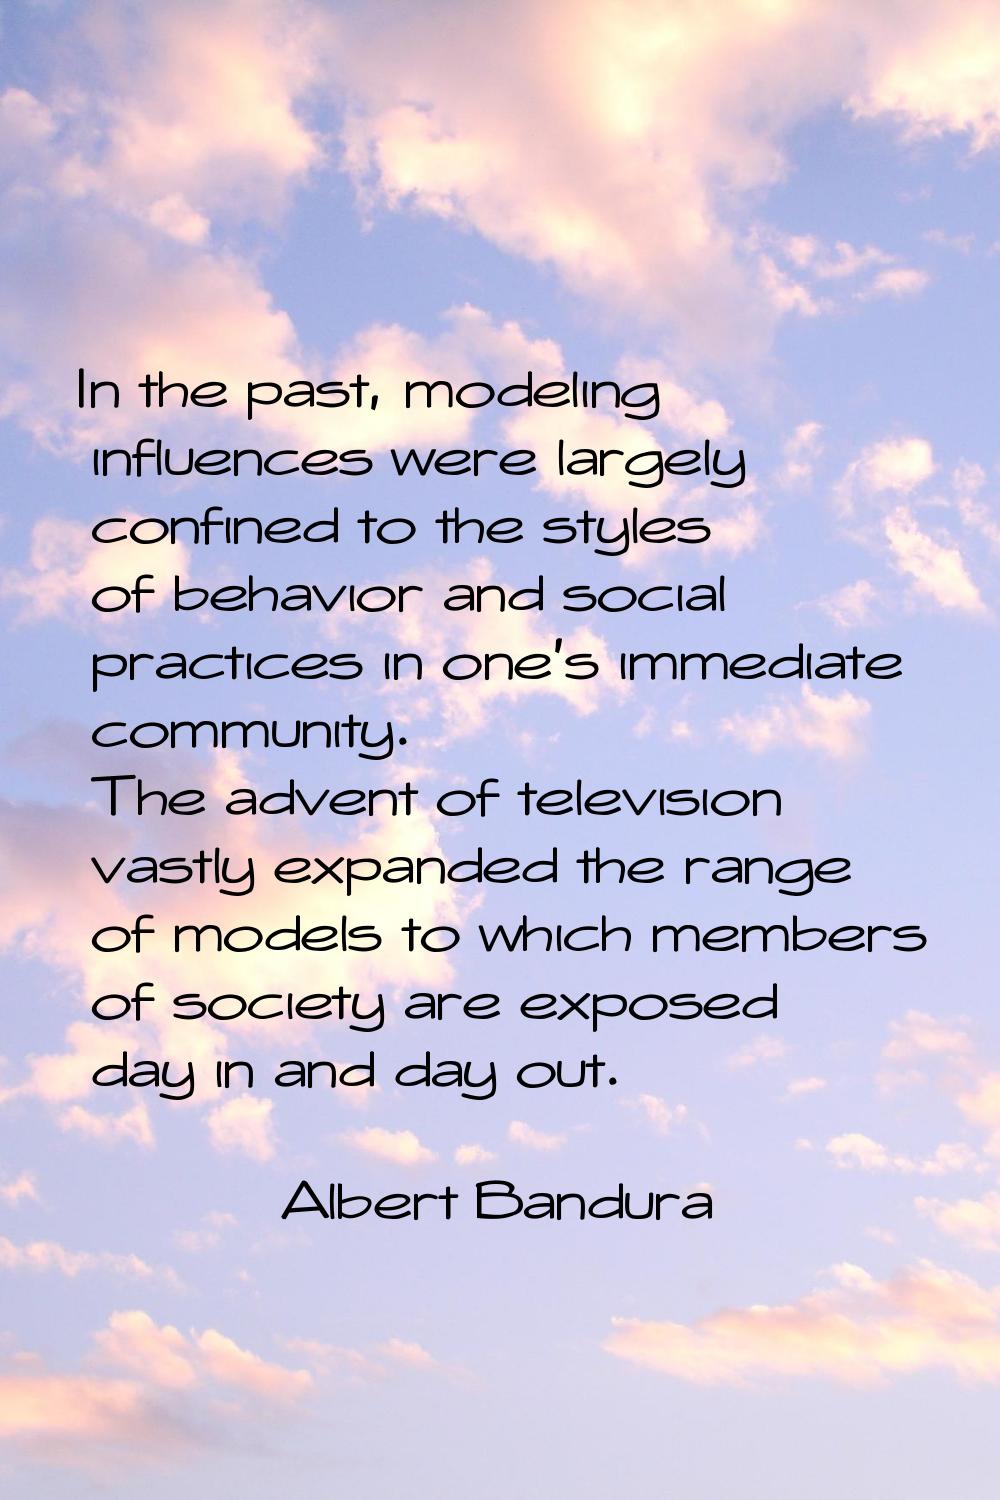 In the past, modeling influences were largely confined to the styles of behavior and social practic